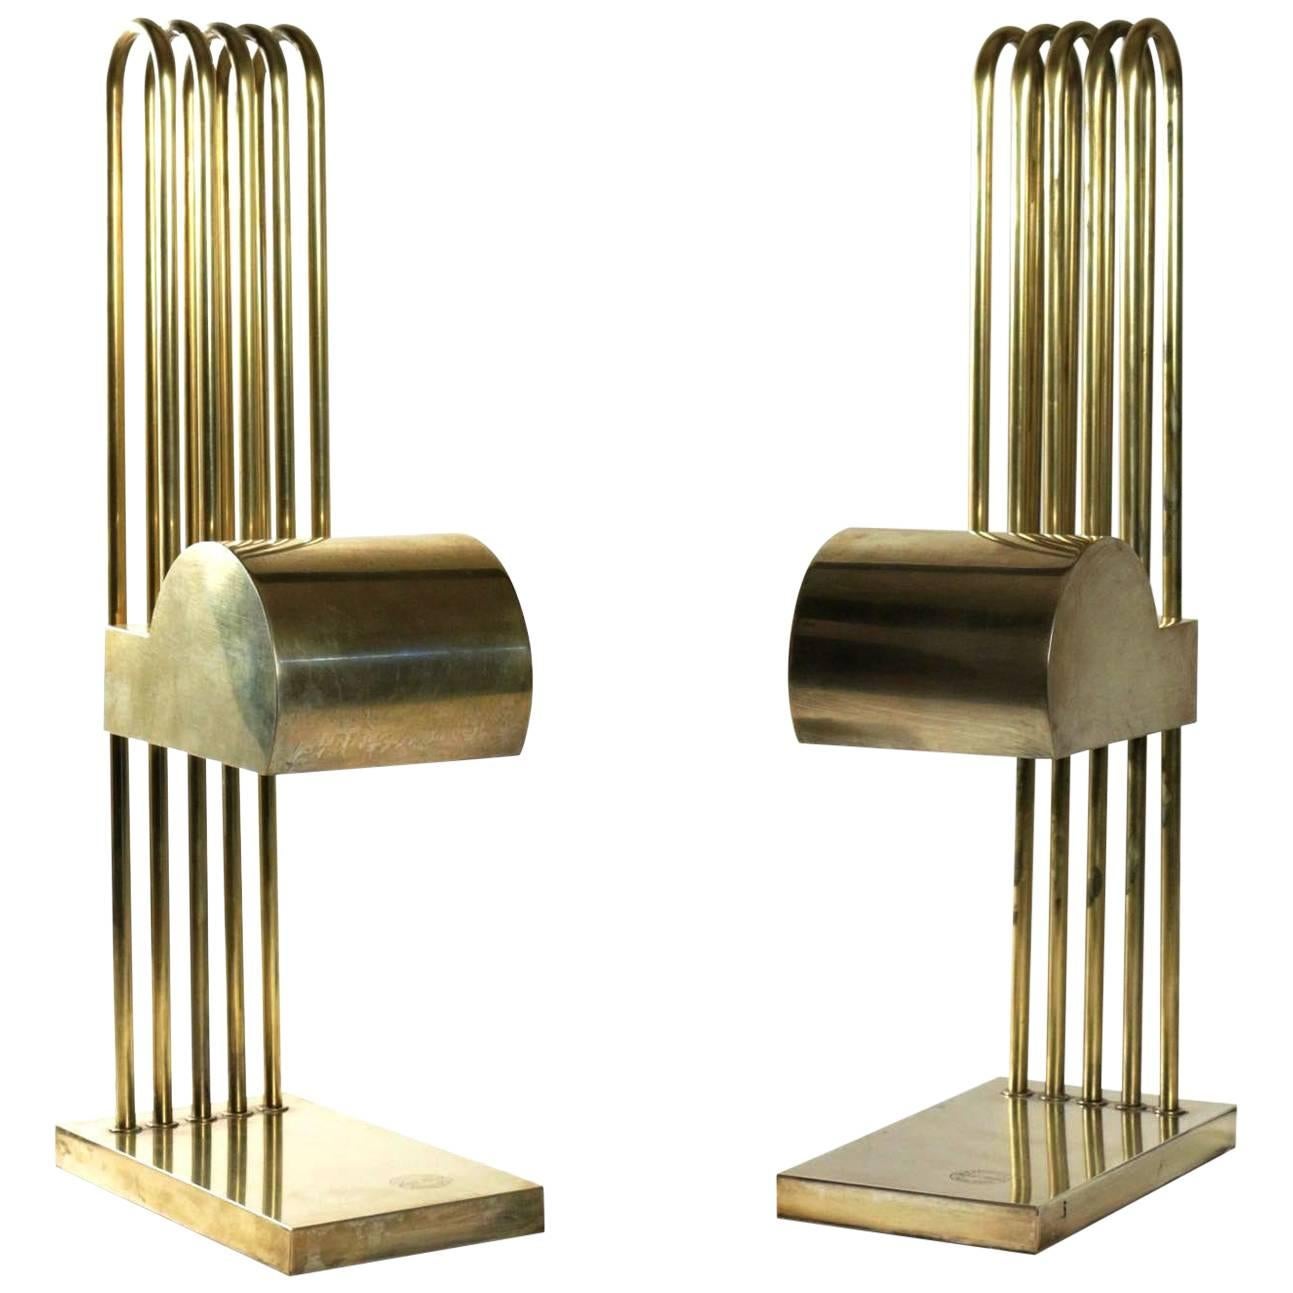 Exceptional Pair of Brass Table Lights by Marcel Breuer, Paris Exhibition, 1925